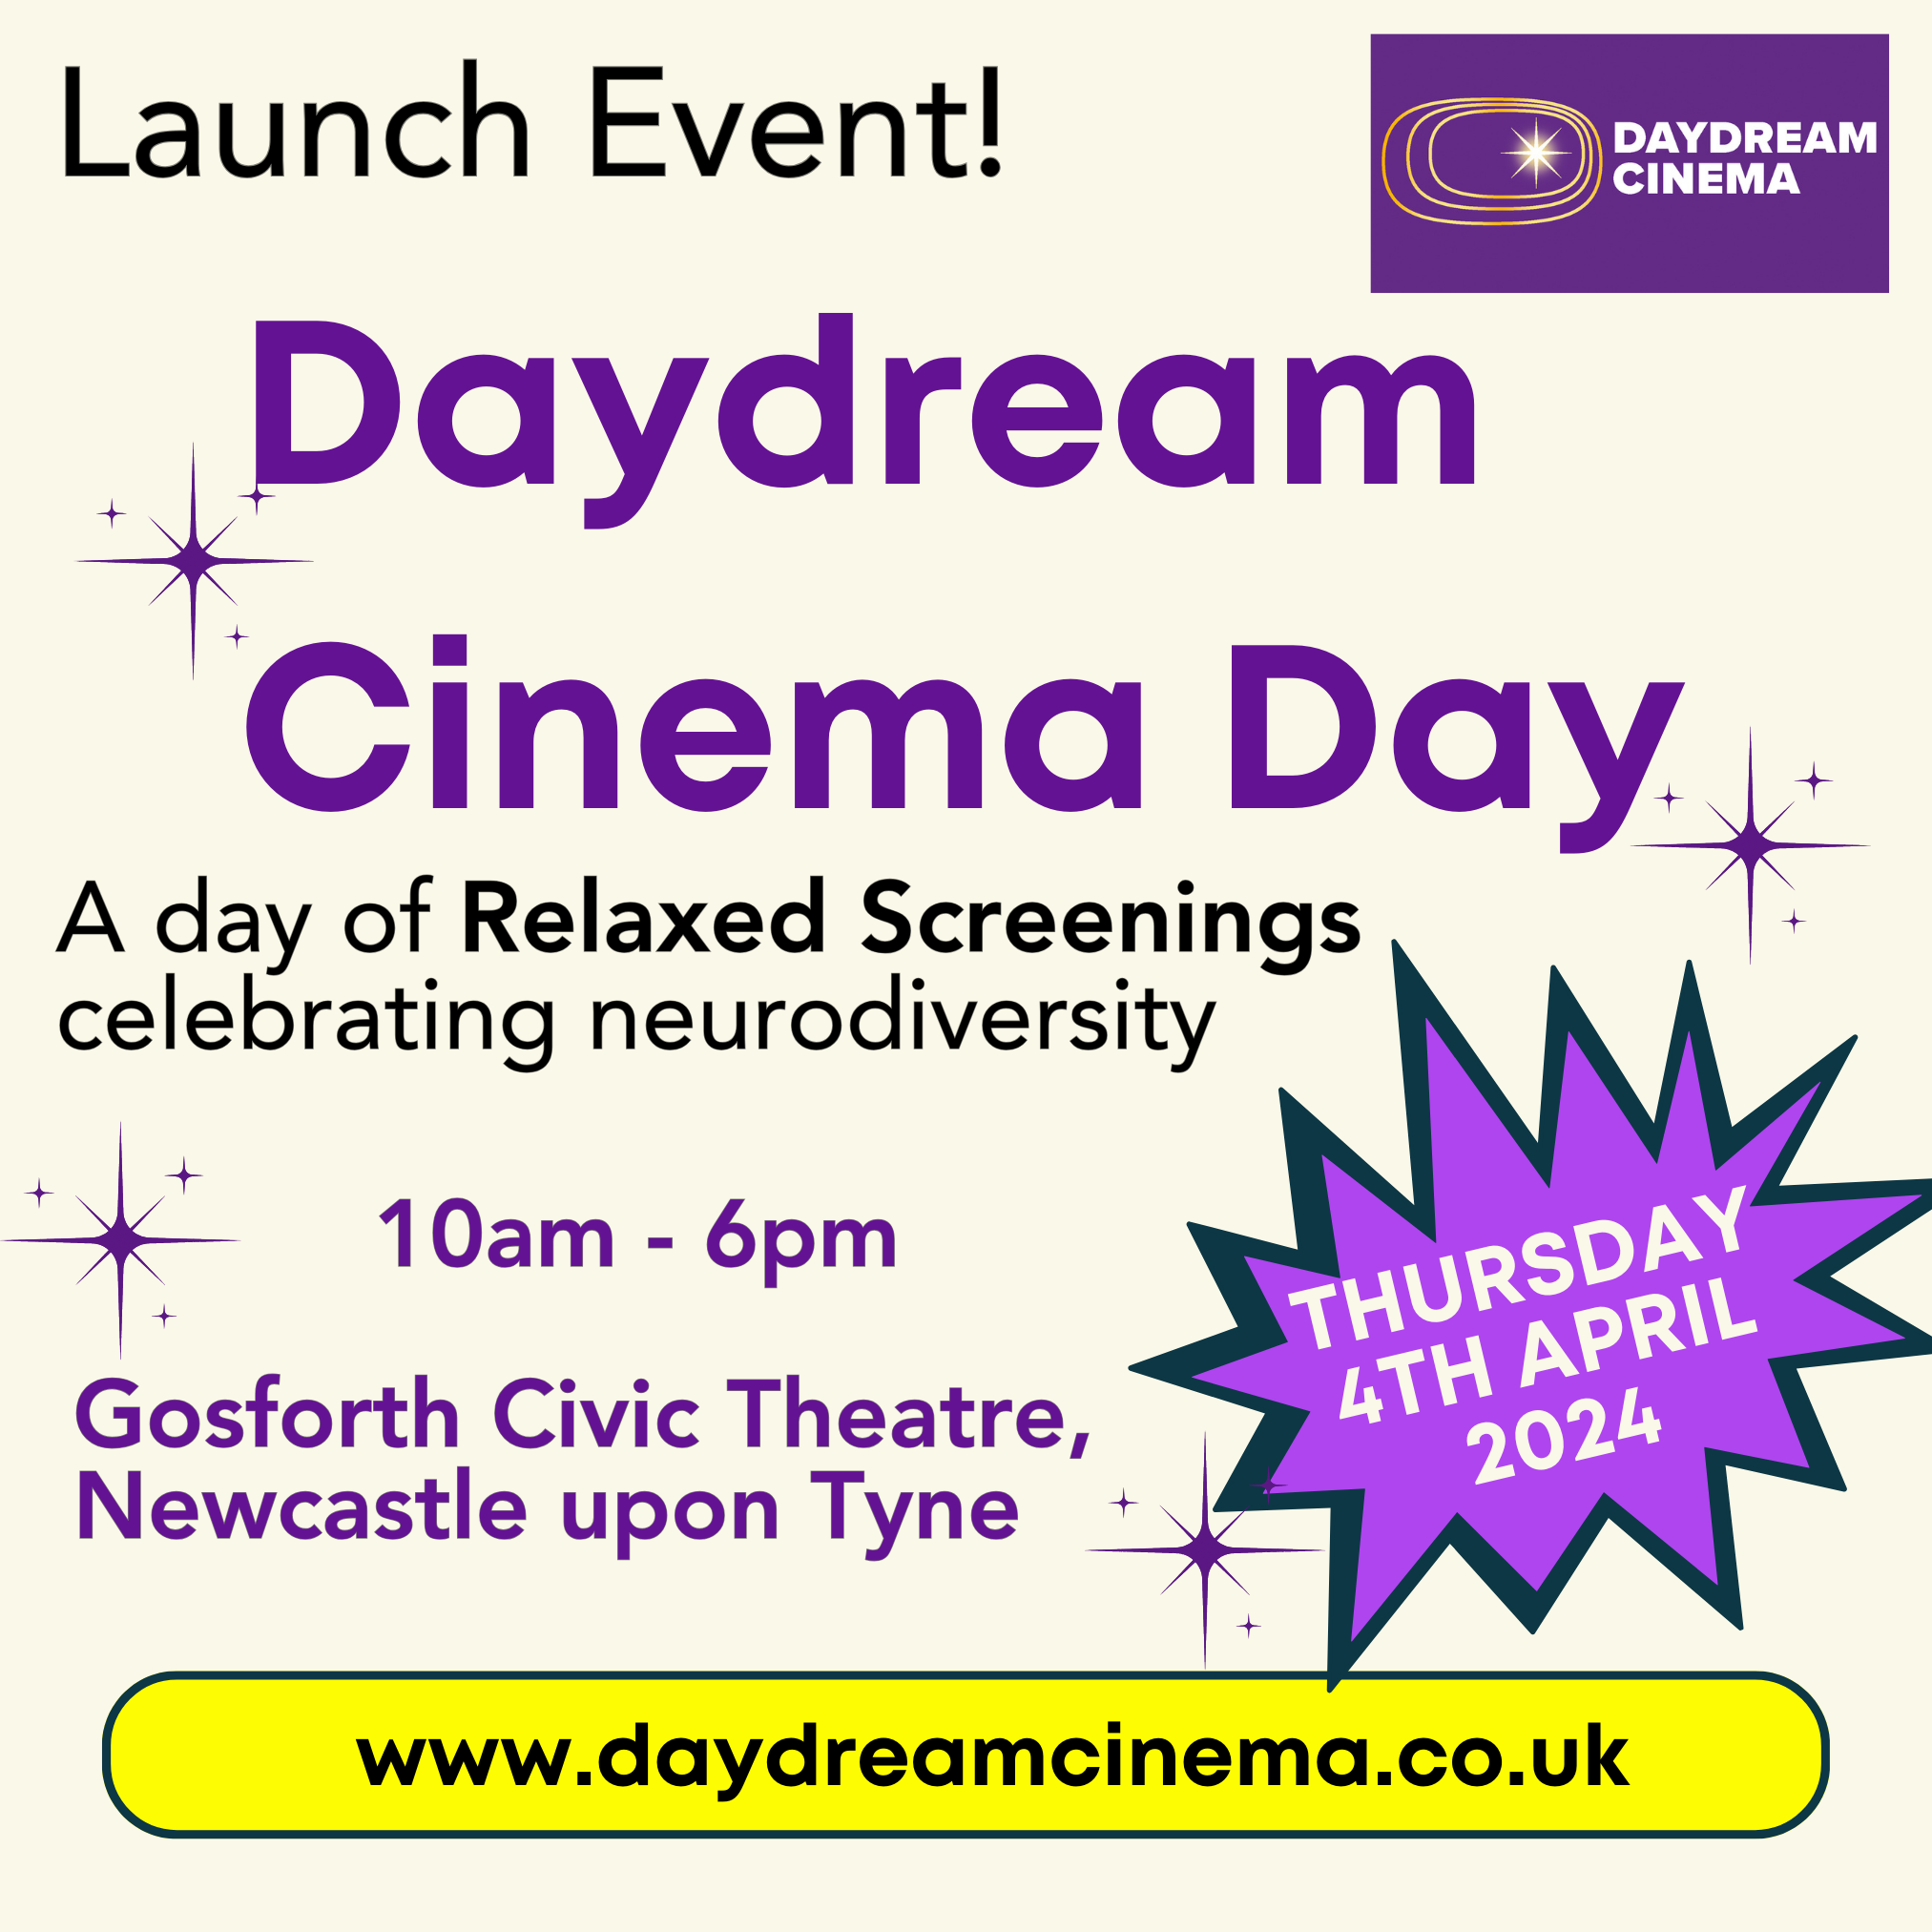 Black or purple text on a cream background with star decorations. Text says: "Launch Event! Daydream Cinema Day. A day of Relaxed Screenings celebrating neurodiversity. 10am - 6pm. Thursday 4th April. Gosforth Civic Theatre, Newcastle upon Tyne. www.daydreamcinema.co.uk The Daydream Cinema logo is on the top right, a screen shaped portal made up of 3 yellow rectangular rings with a star in the middle.